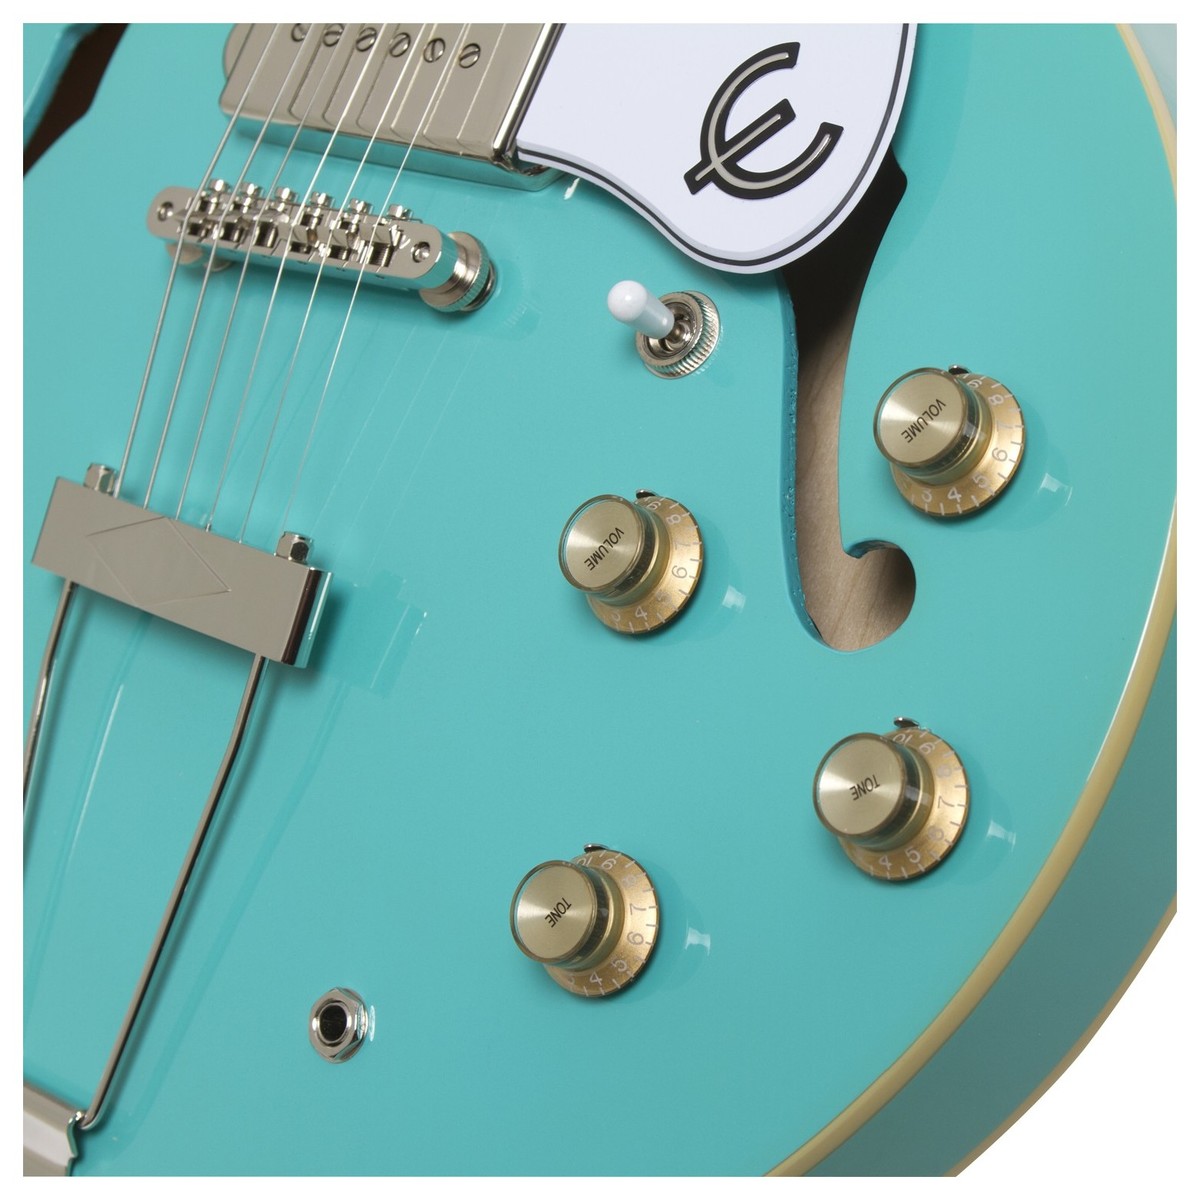 Epiphone Casino Coupe Archtop 2019 2p90 Ht Pf - Turquoise - Semi-Hollow E-Gitarre - Variation 1